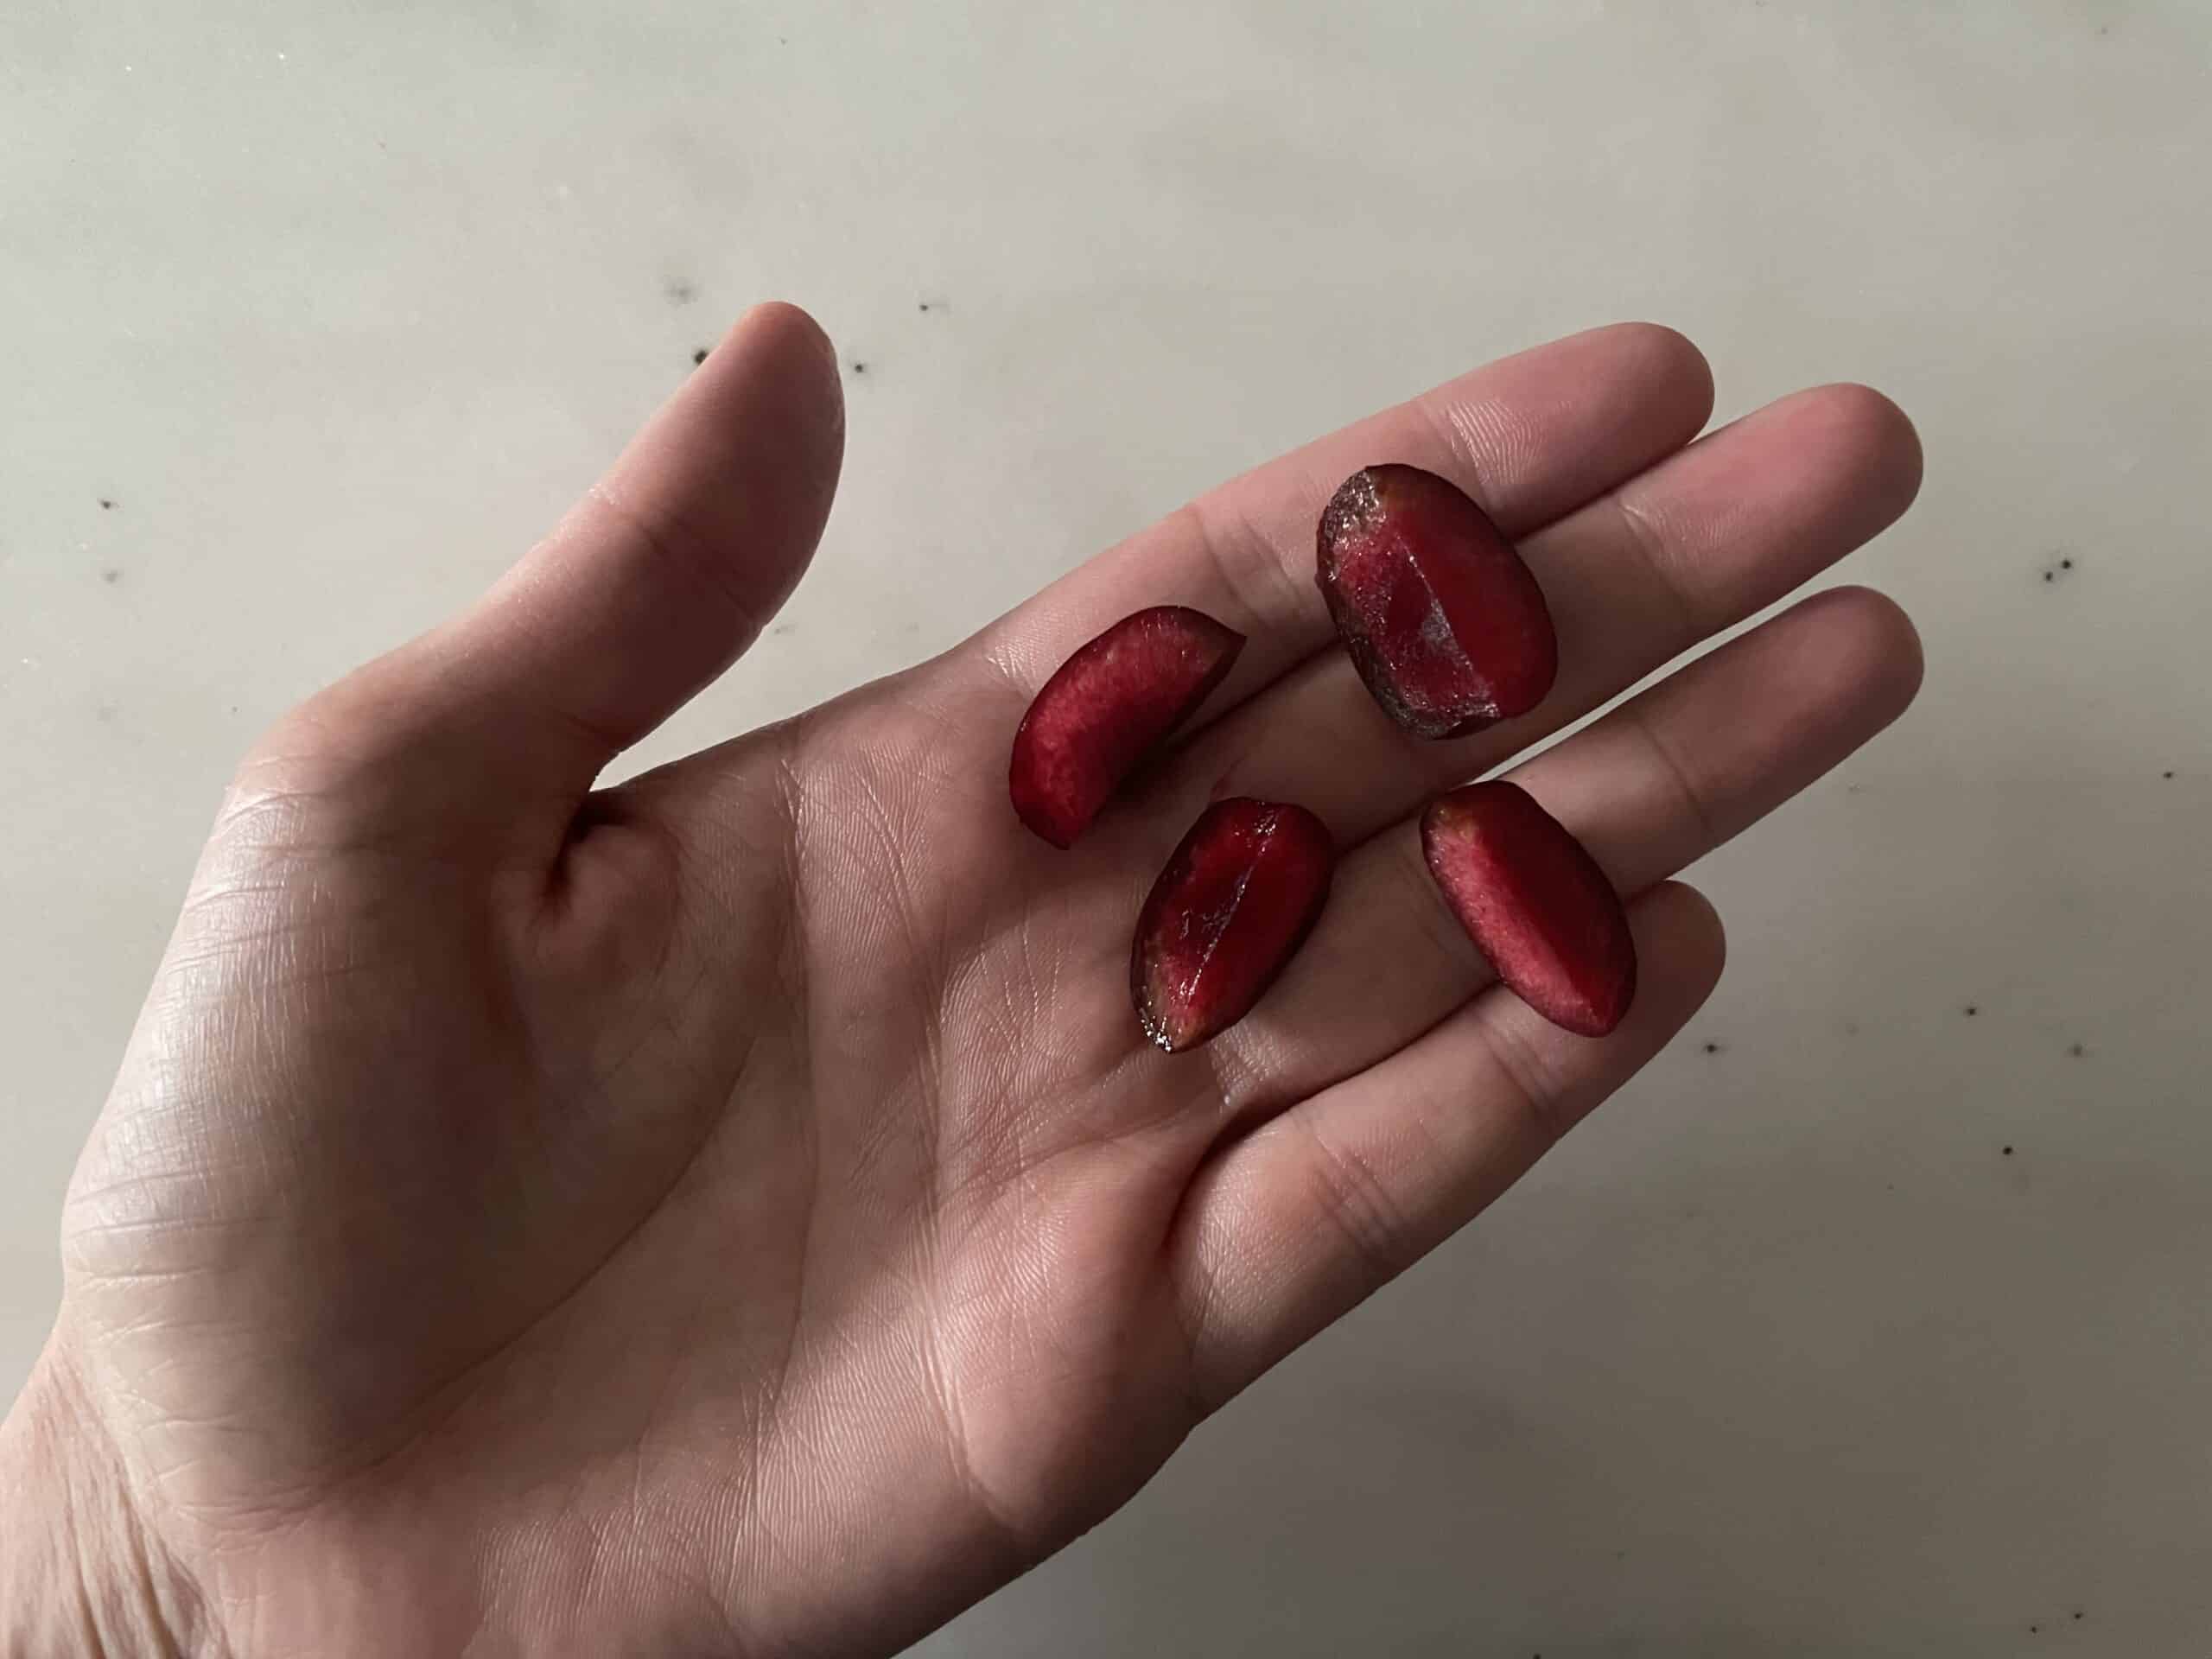 a hand holding four quartered dark red cherries